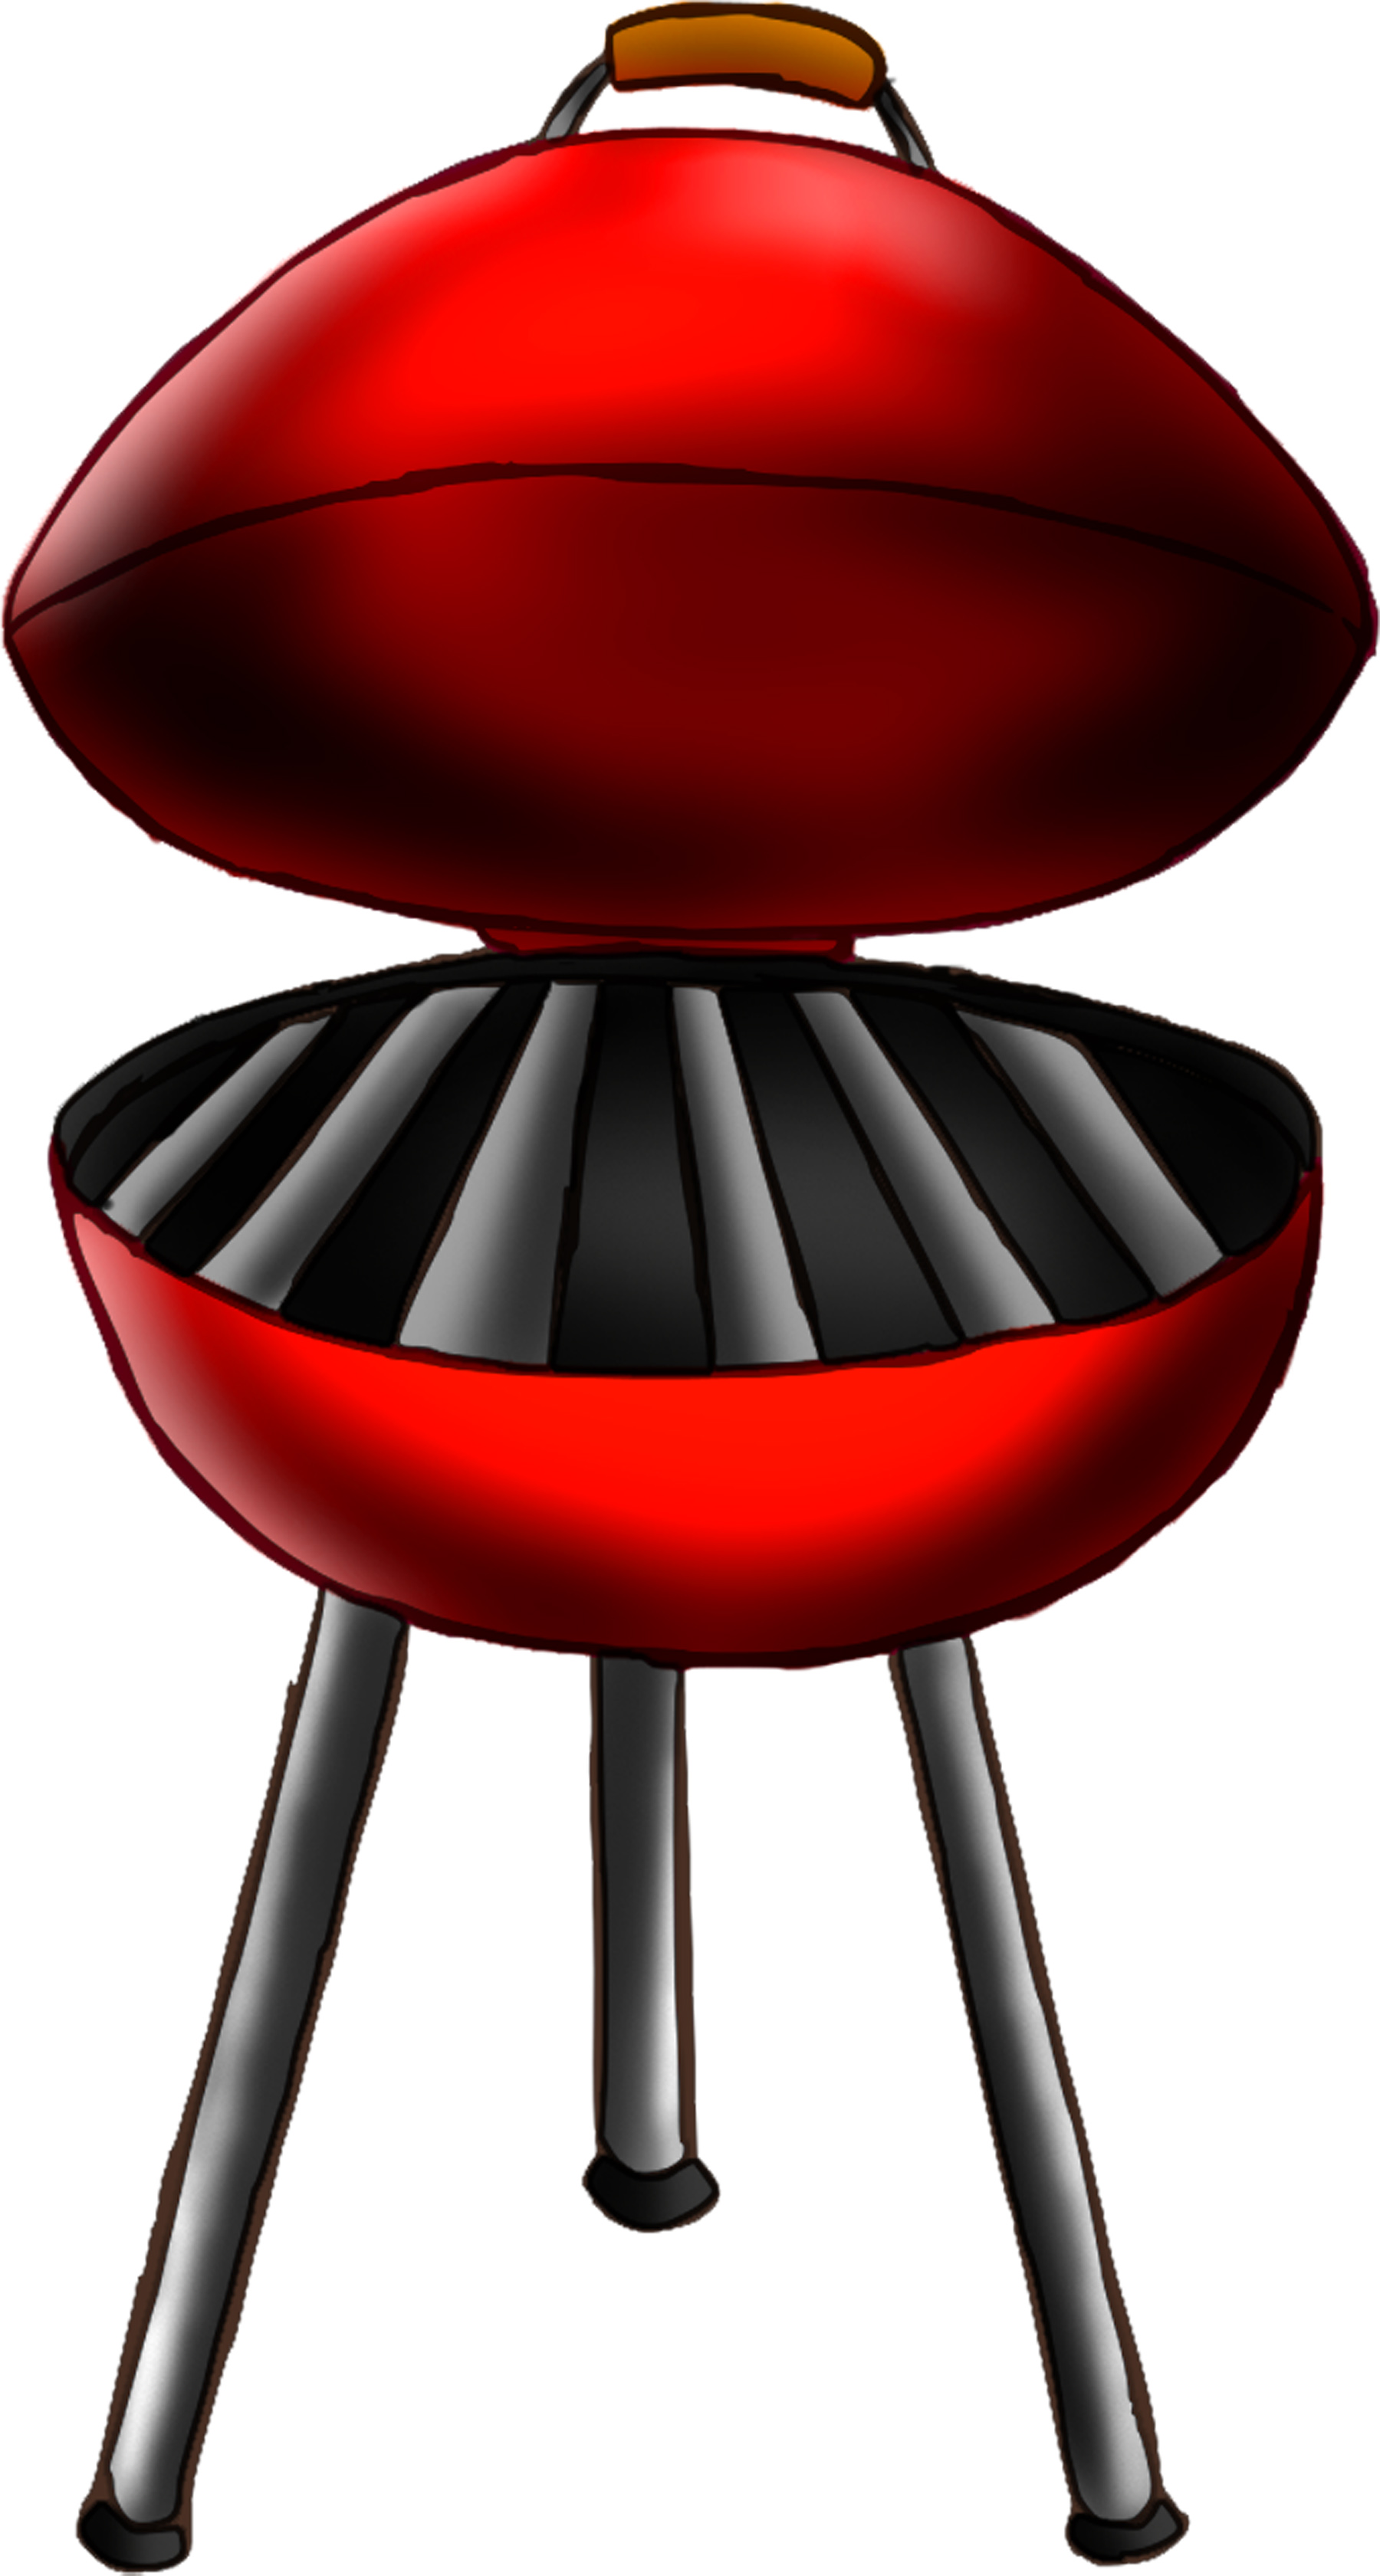 Free bbq clipart the cliparts 3